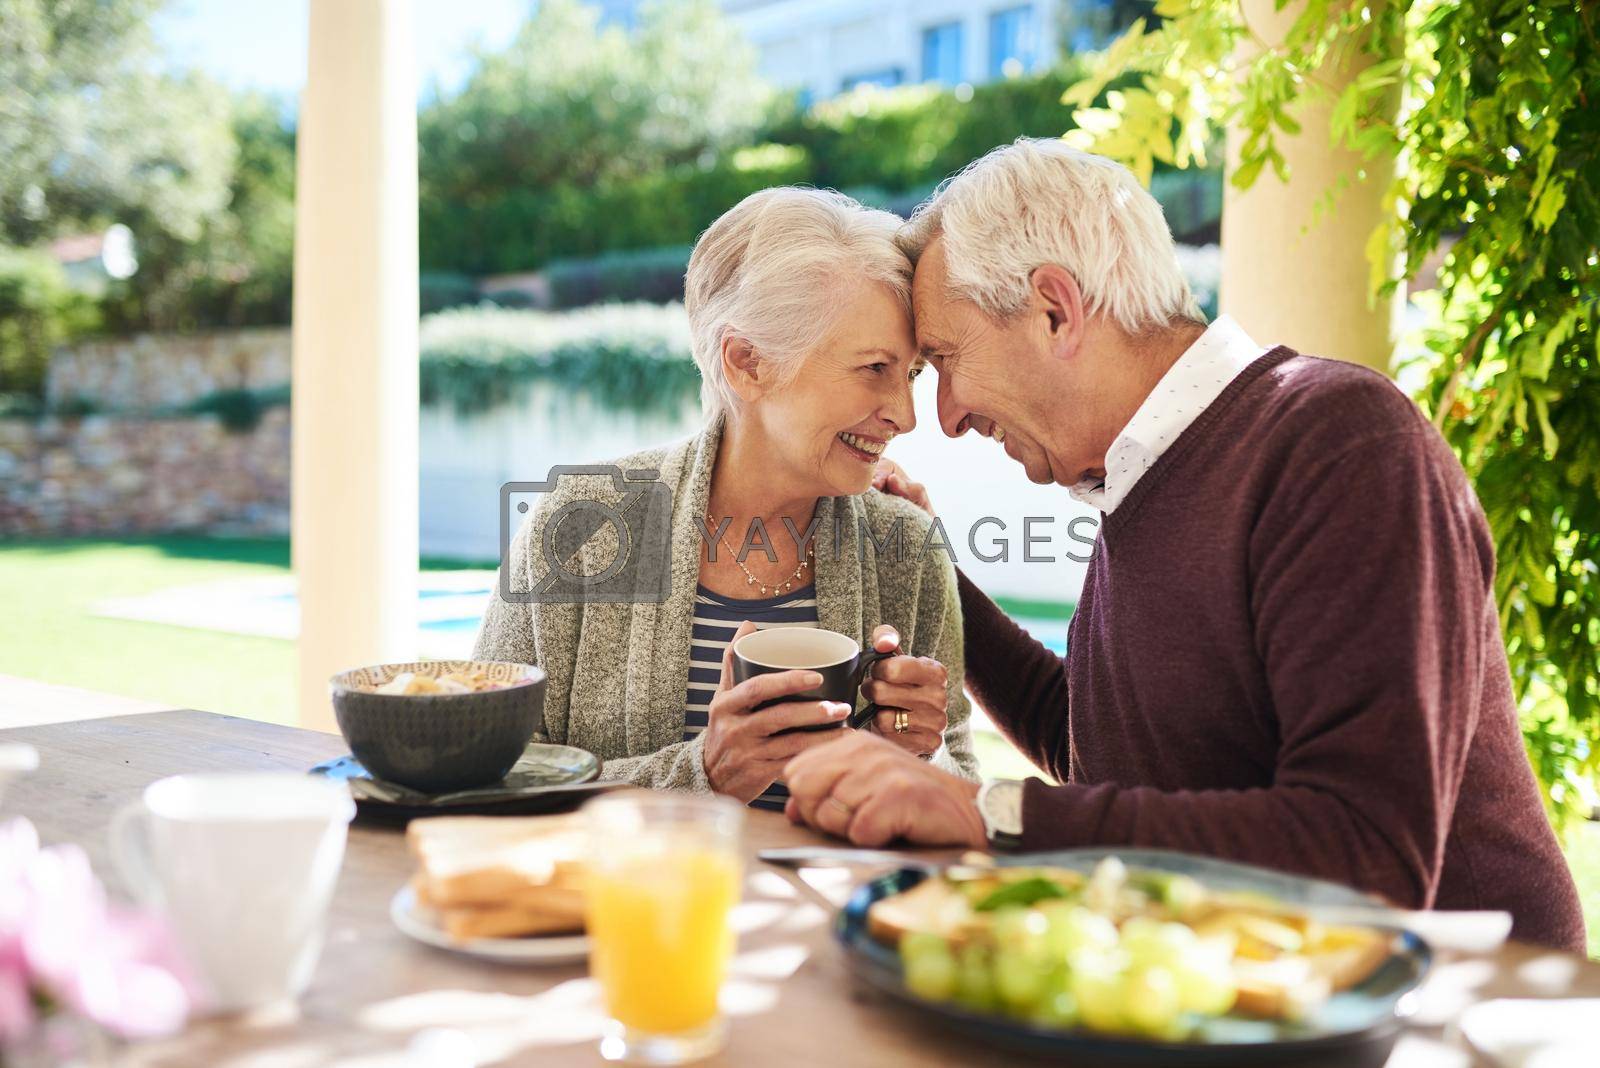 Shot of an affectionate senior couple enjoying a meal together outdoors.